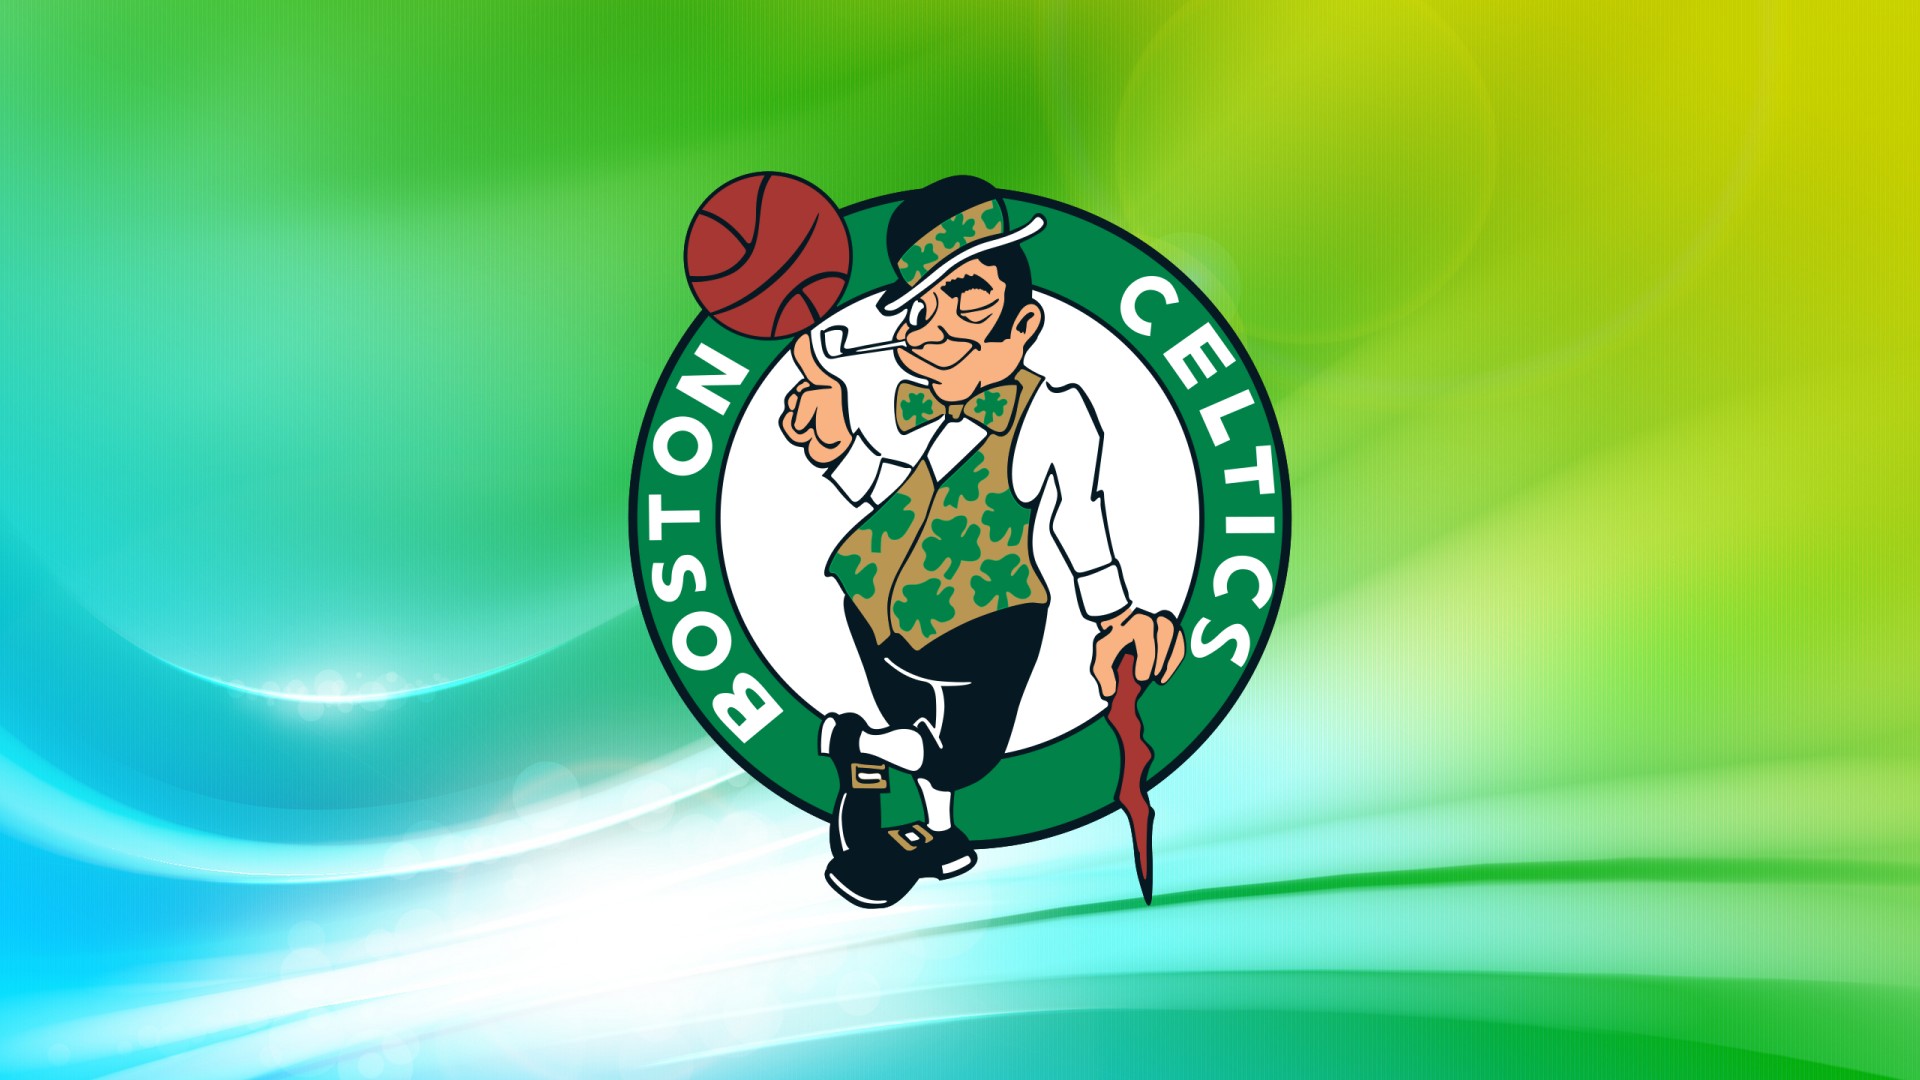 Boston Celtics Logo Backgrounds HD with image dimensions 1920x1080 pixel. You can make this wallpaper for your Desktop Computer Backgrounds, Windows or Mac Screensavers, iPhone Lock screen, Tablet or Android and another Mobile Phone device